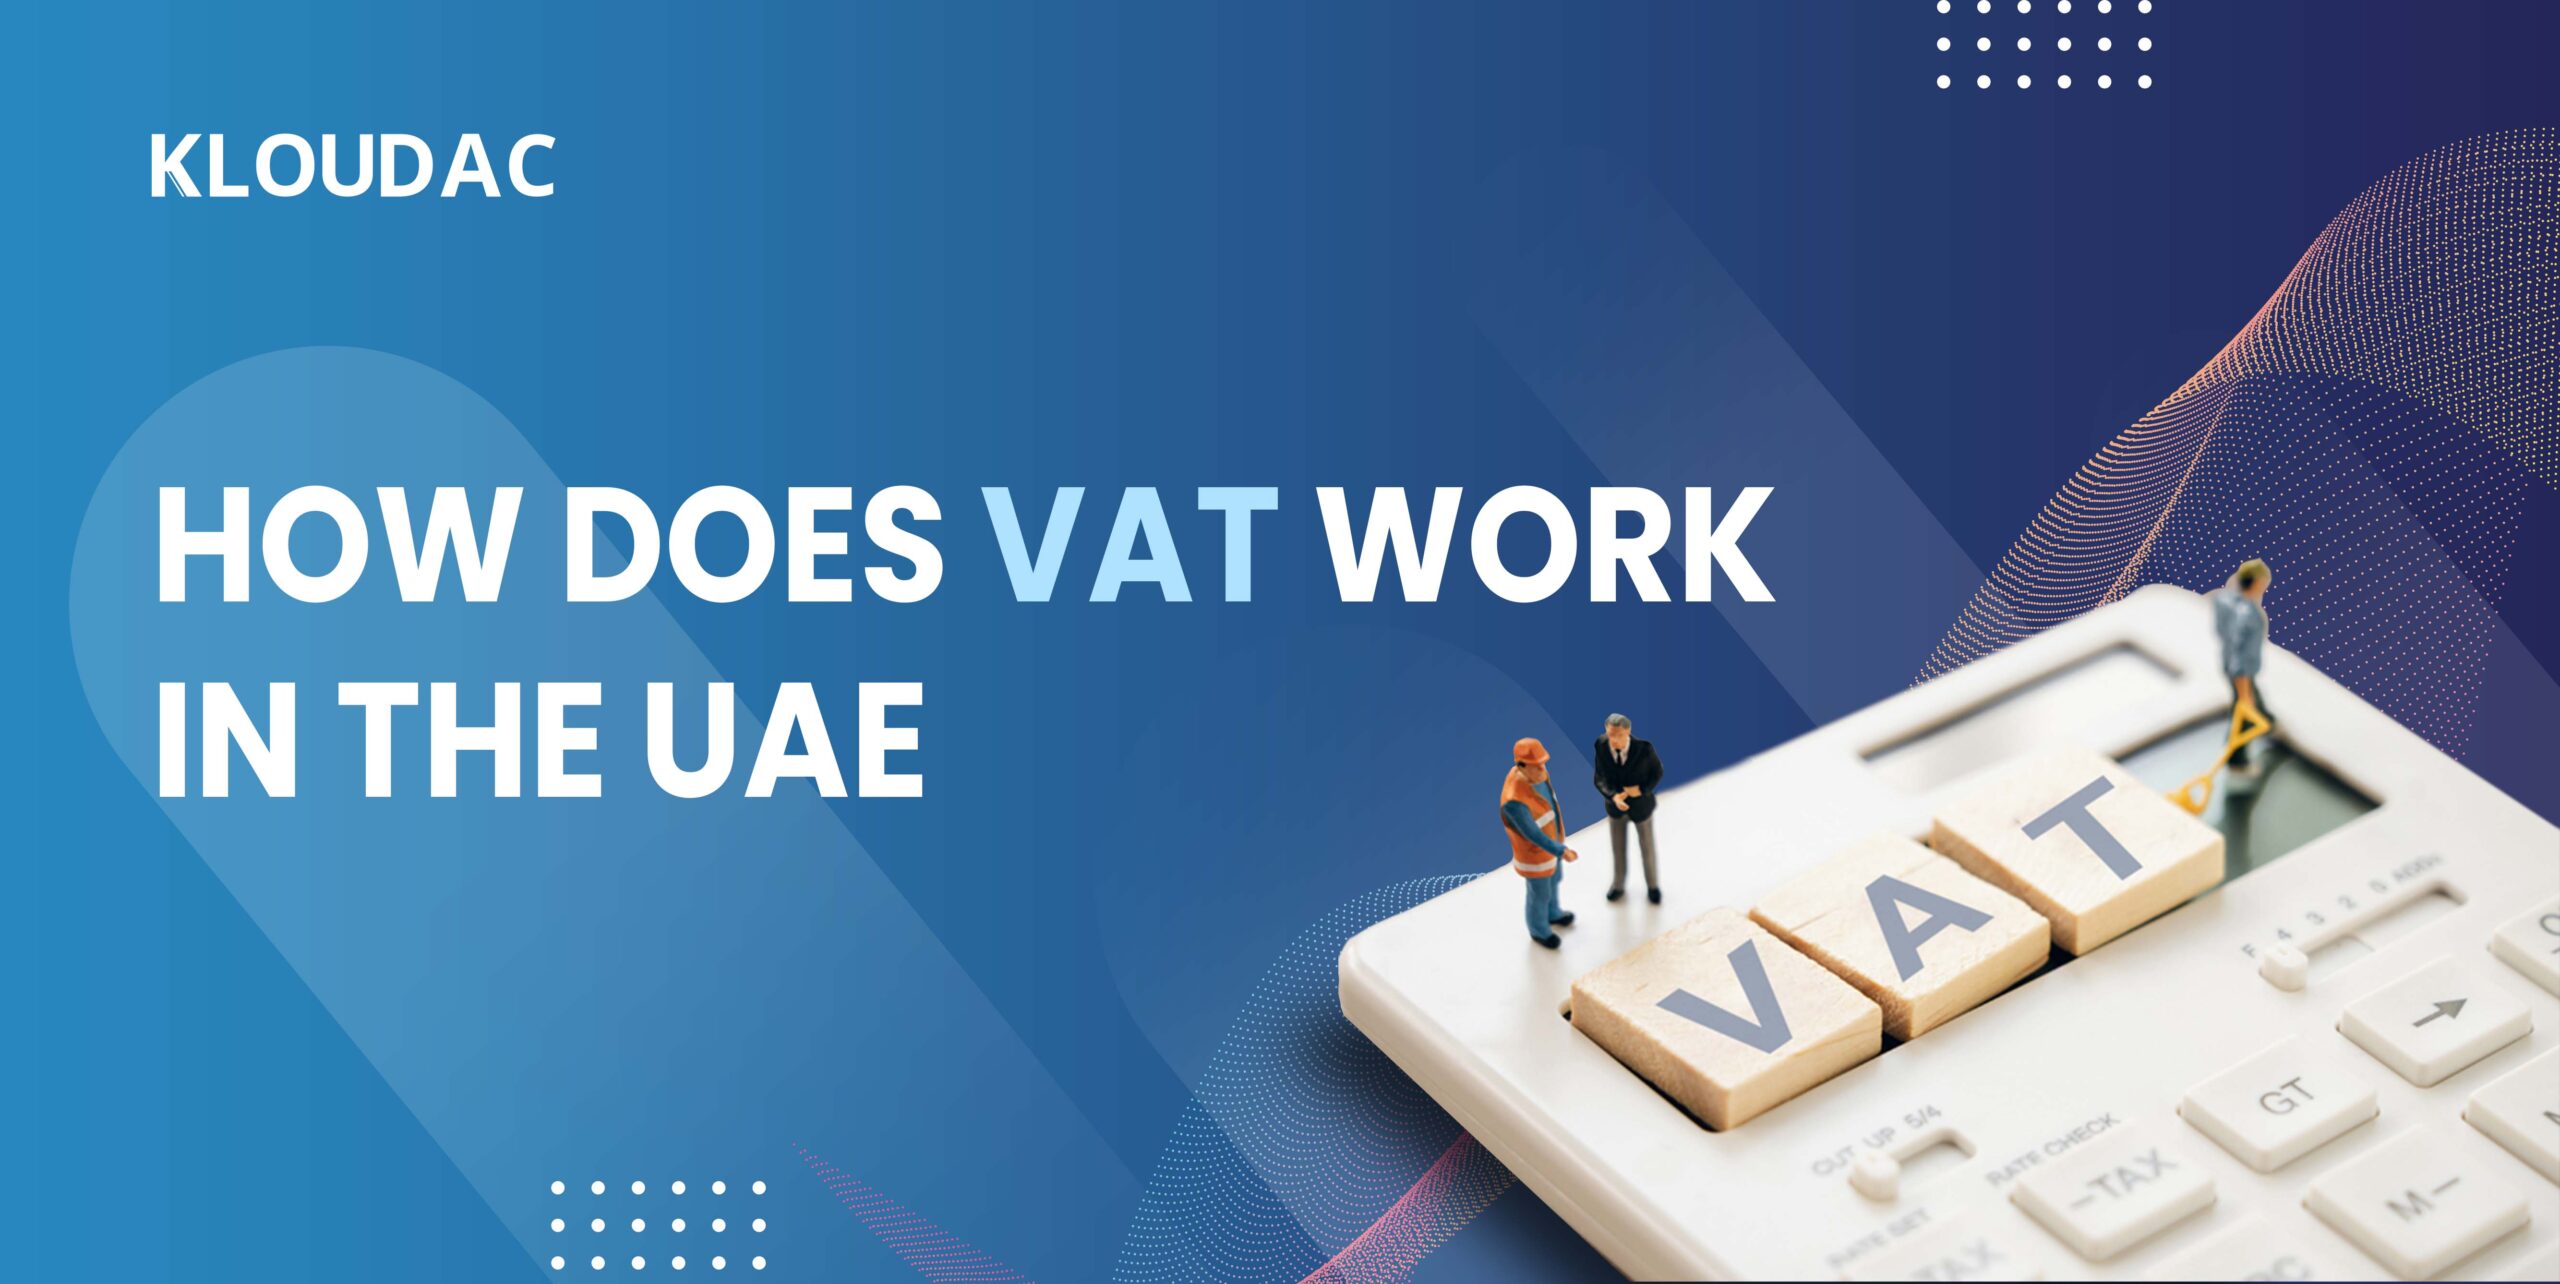 How does VAT work in the UAE?